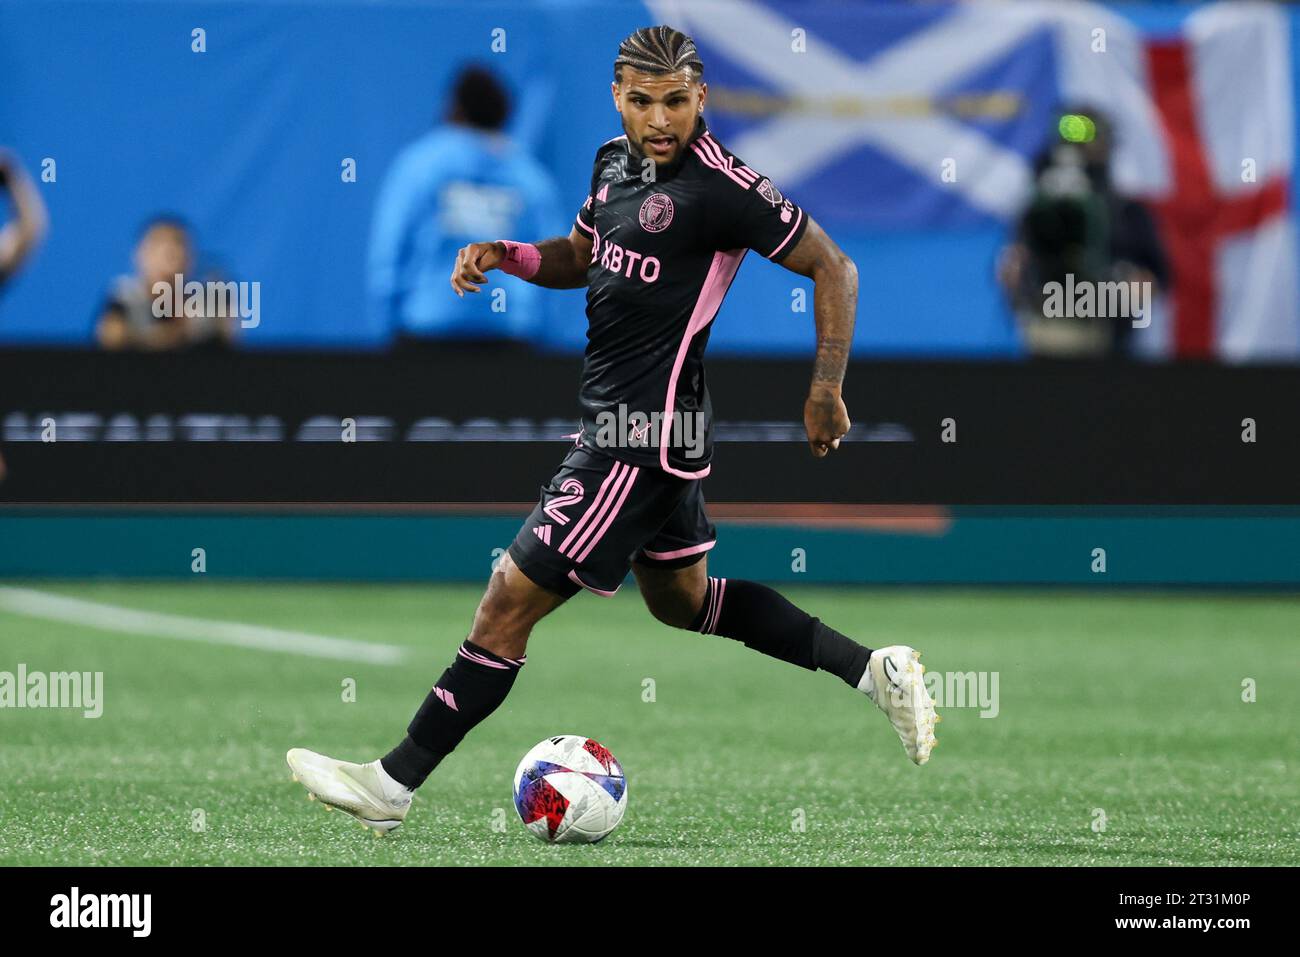 Charlotte, North Carolina, USA. 21st Oct, 2023. Inter Miami defender DeAndre Yedlin (2) controls the ball during the MLS soccer match between Inter Miami CF and Charlotte FC at Bank of America Stadium in Charlotte, North Carolina. Greg Atkins/CSM (Credit Image: © Greg Atkins/Cal Sport Media). Credit: csm/Alamy Live News Stock Photo